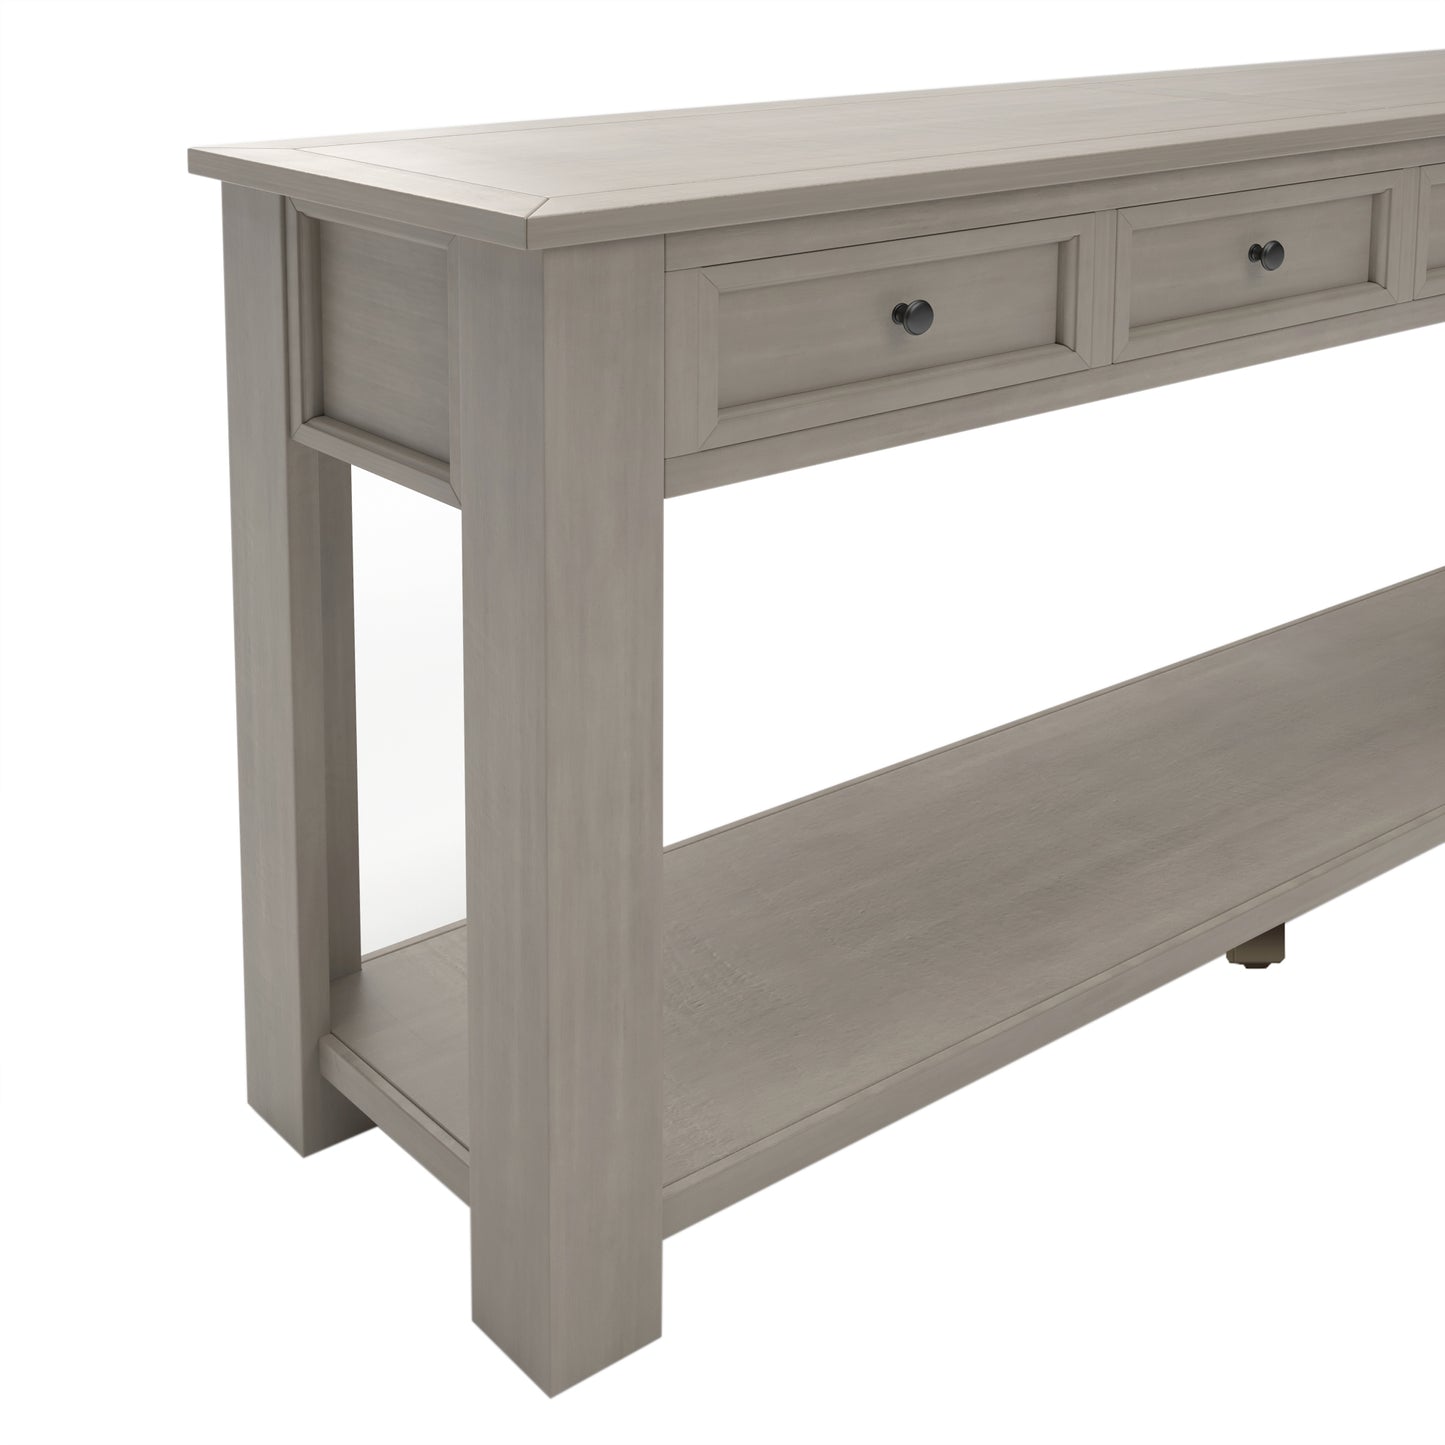 Console Table/Sofa Table with Storage Drawers and Bottom Shelf